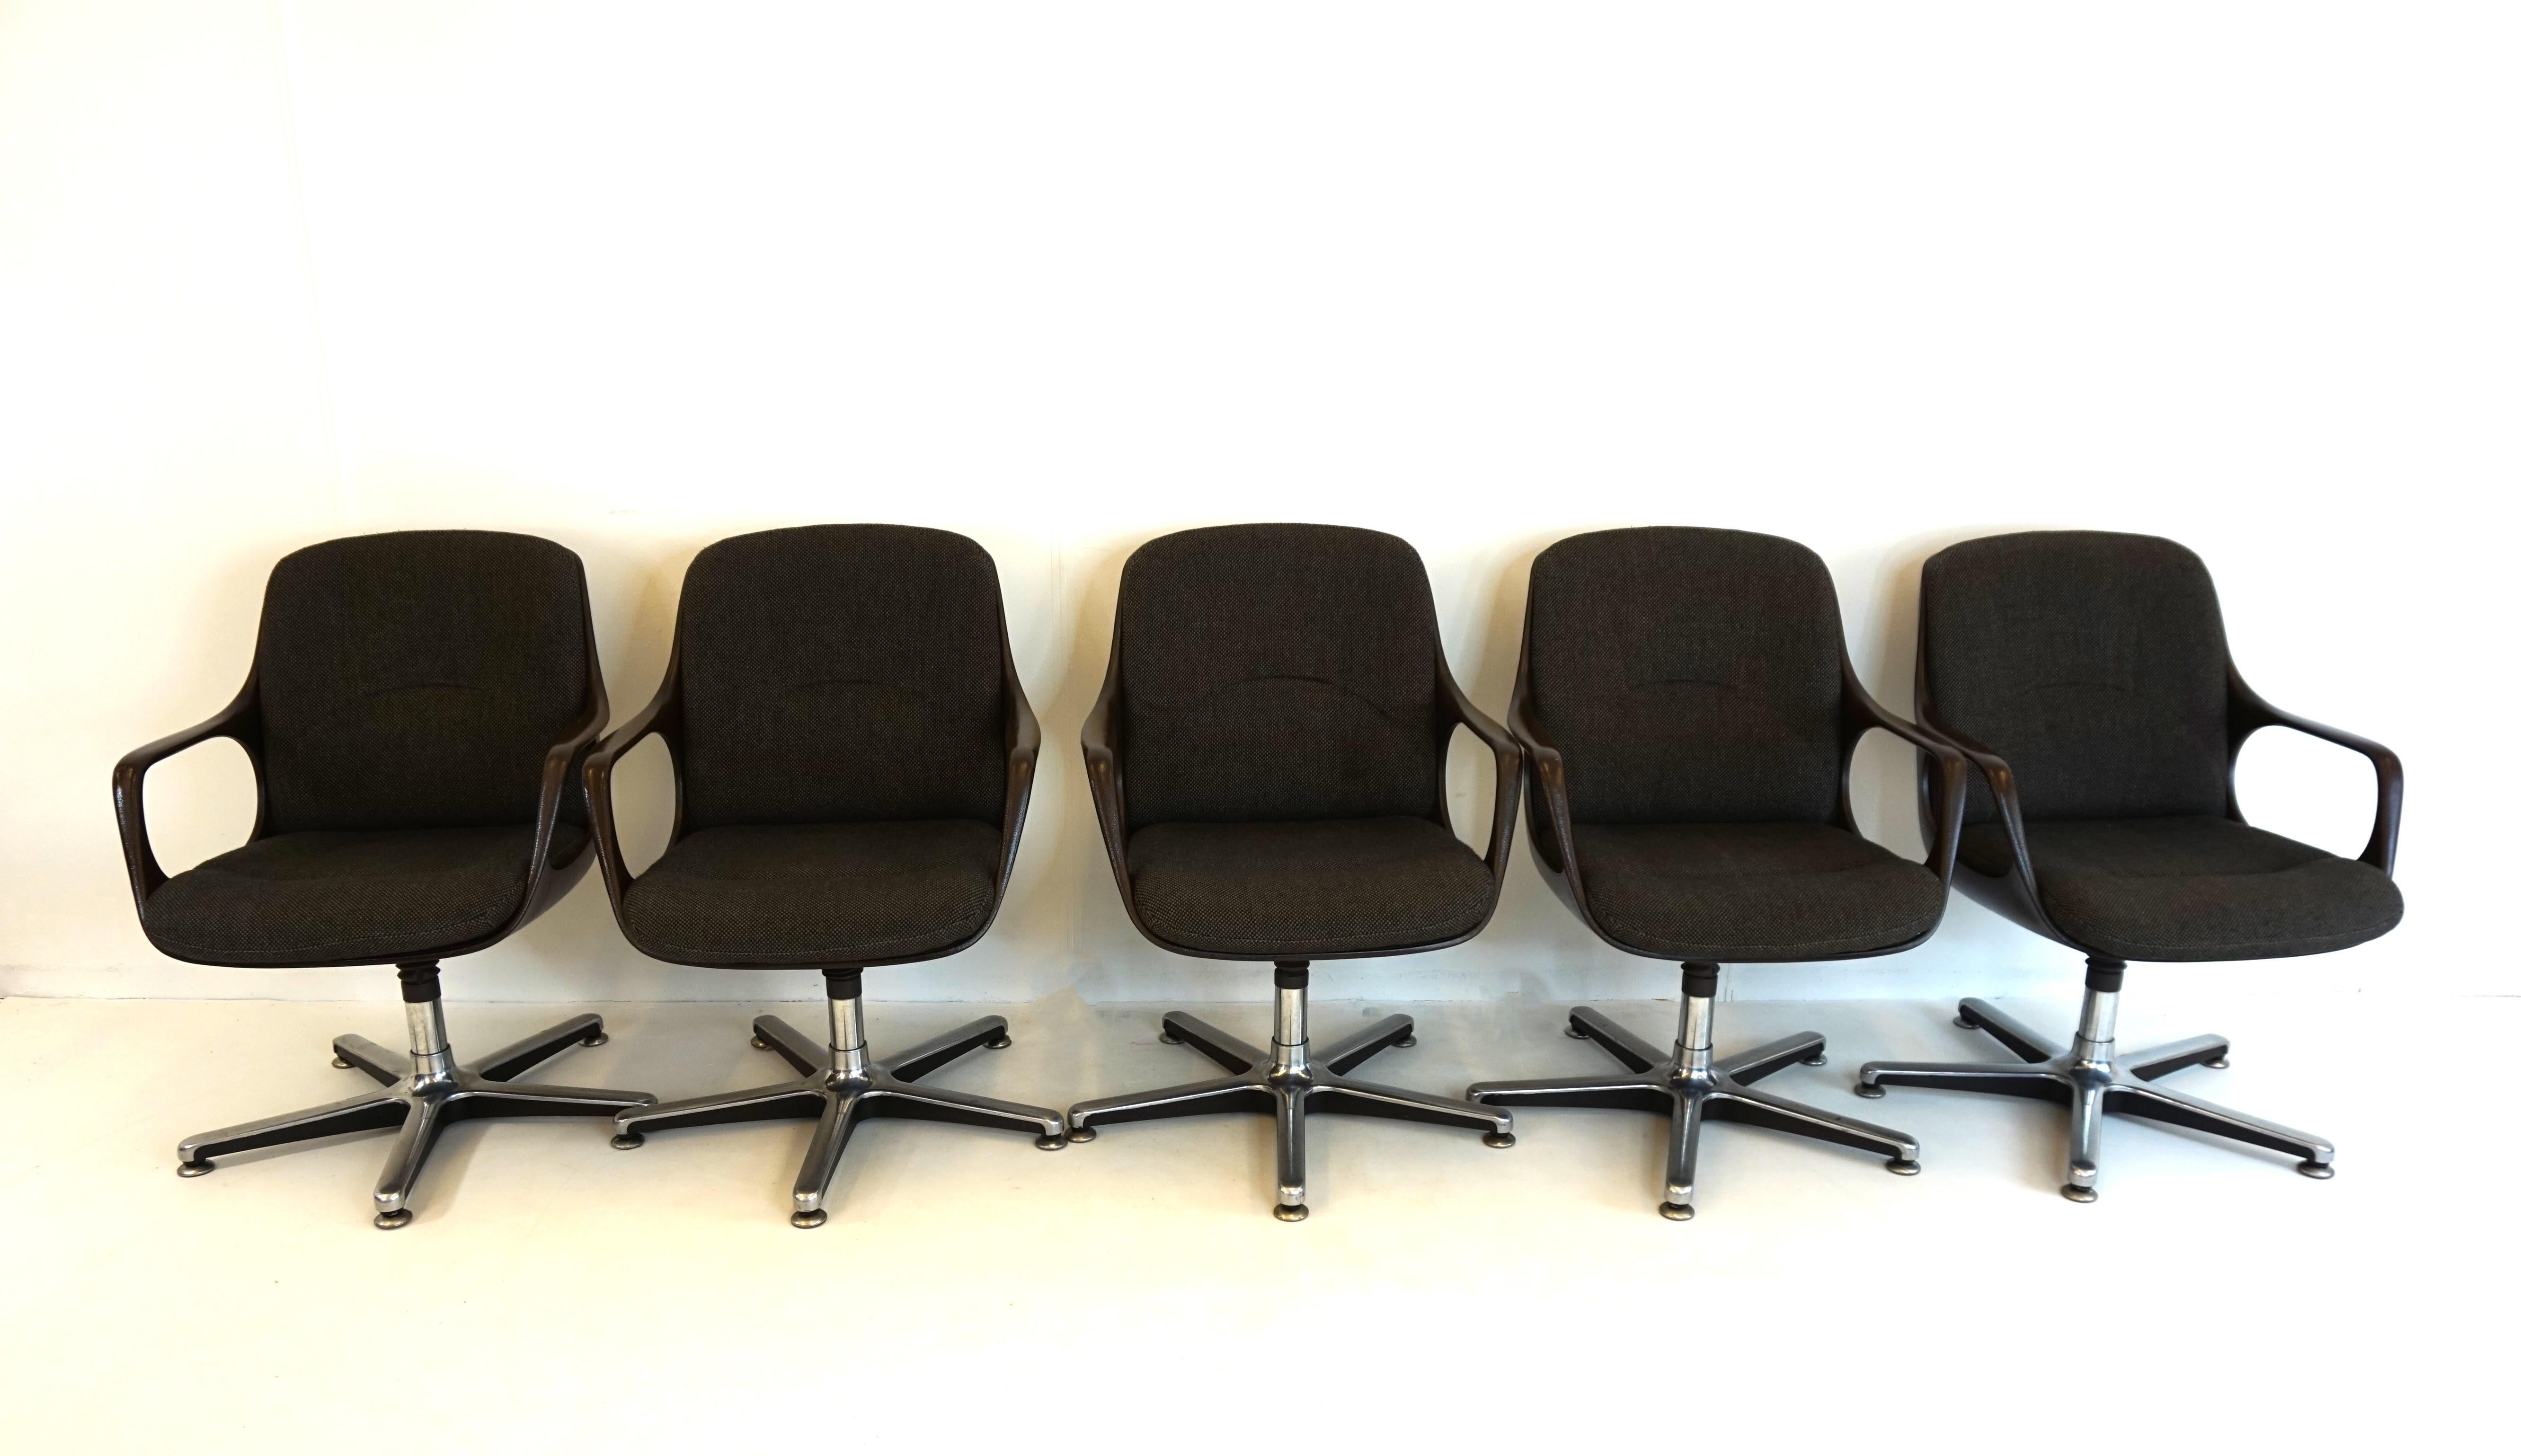 American Chromcraft Set of 5 Space Age Office/Dining Room Chairs